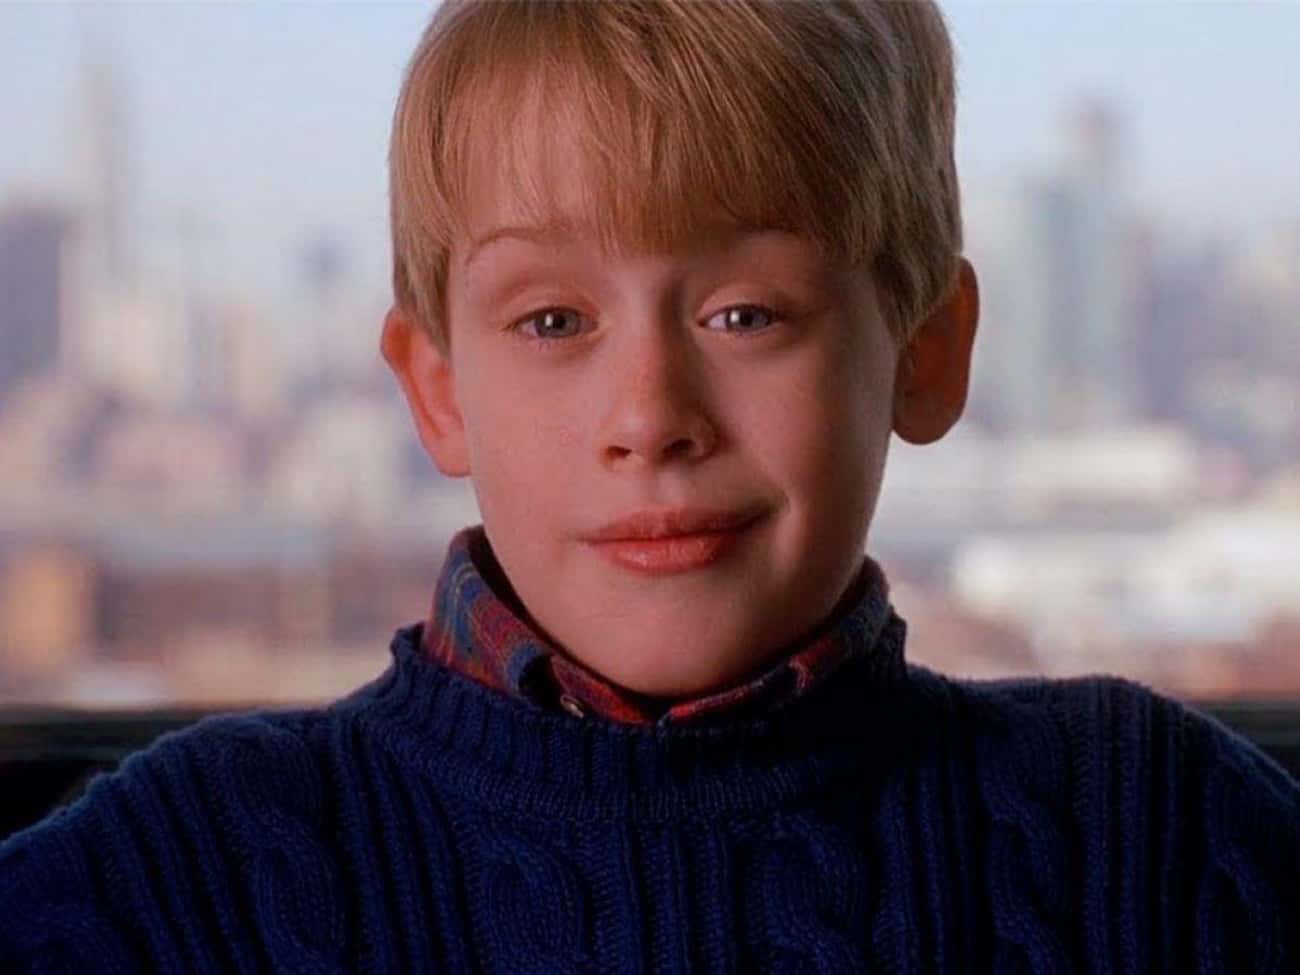 Kevin McCallister - 'Home Alone'